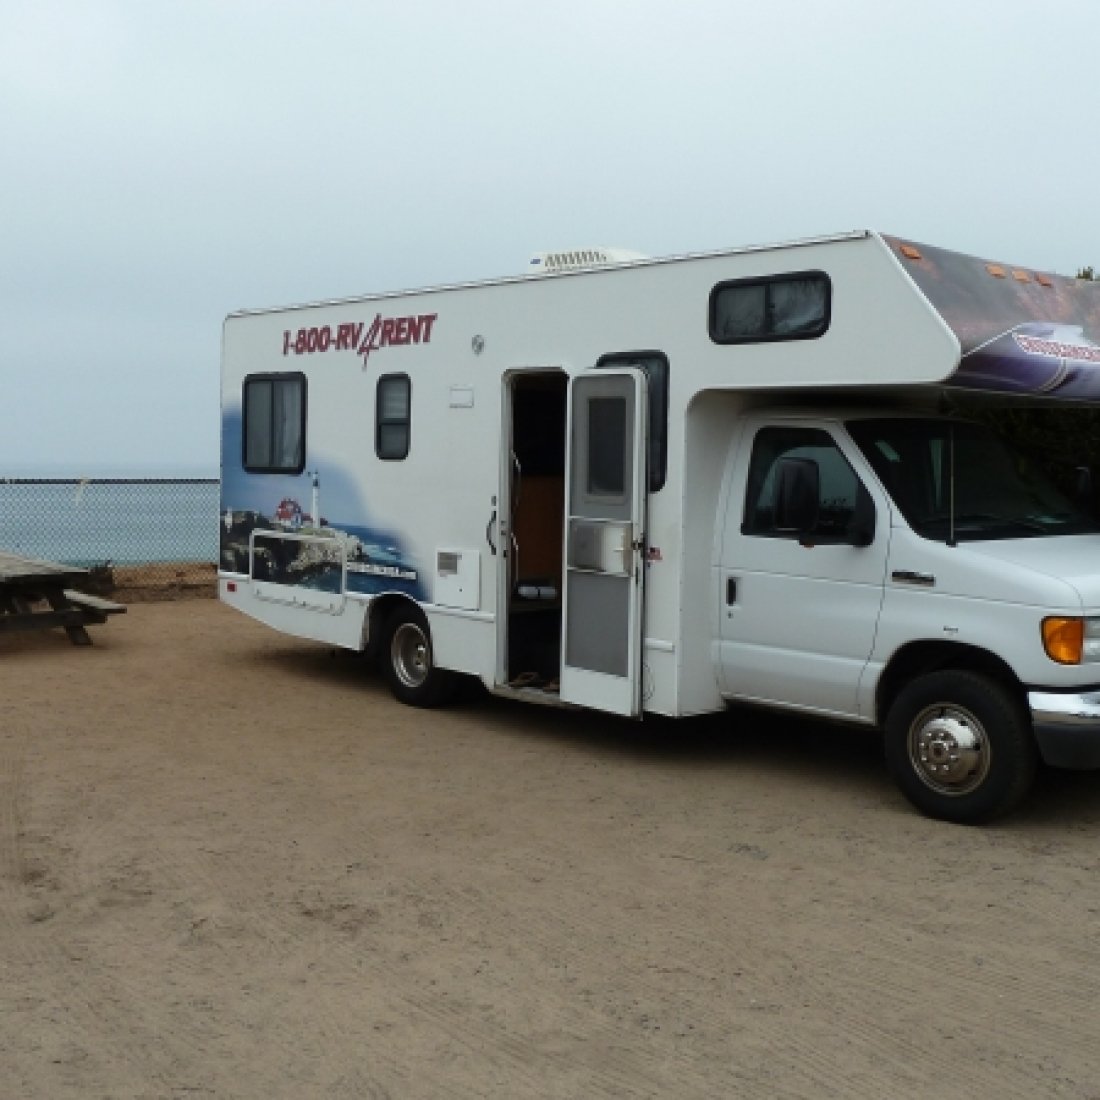 RV with ocean in background